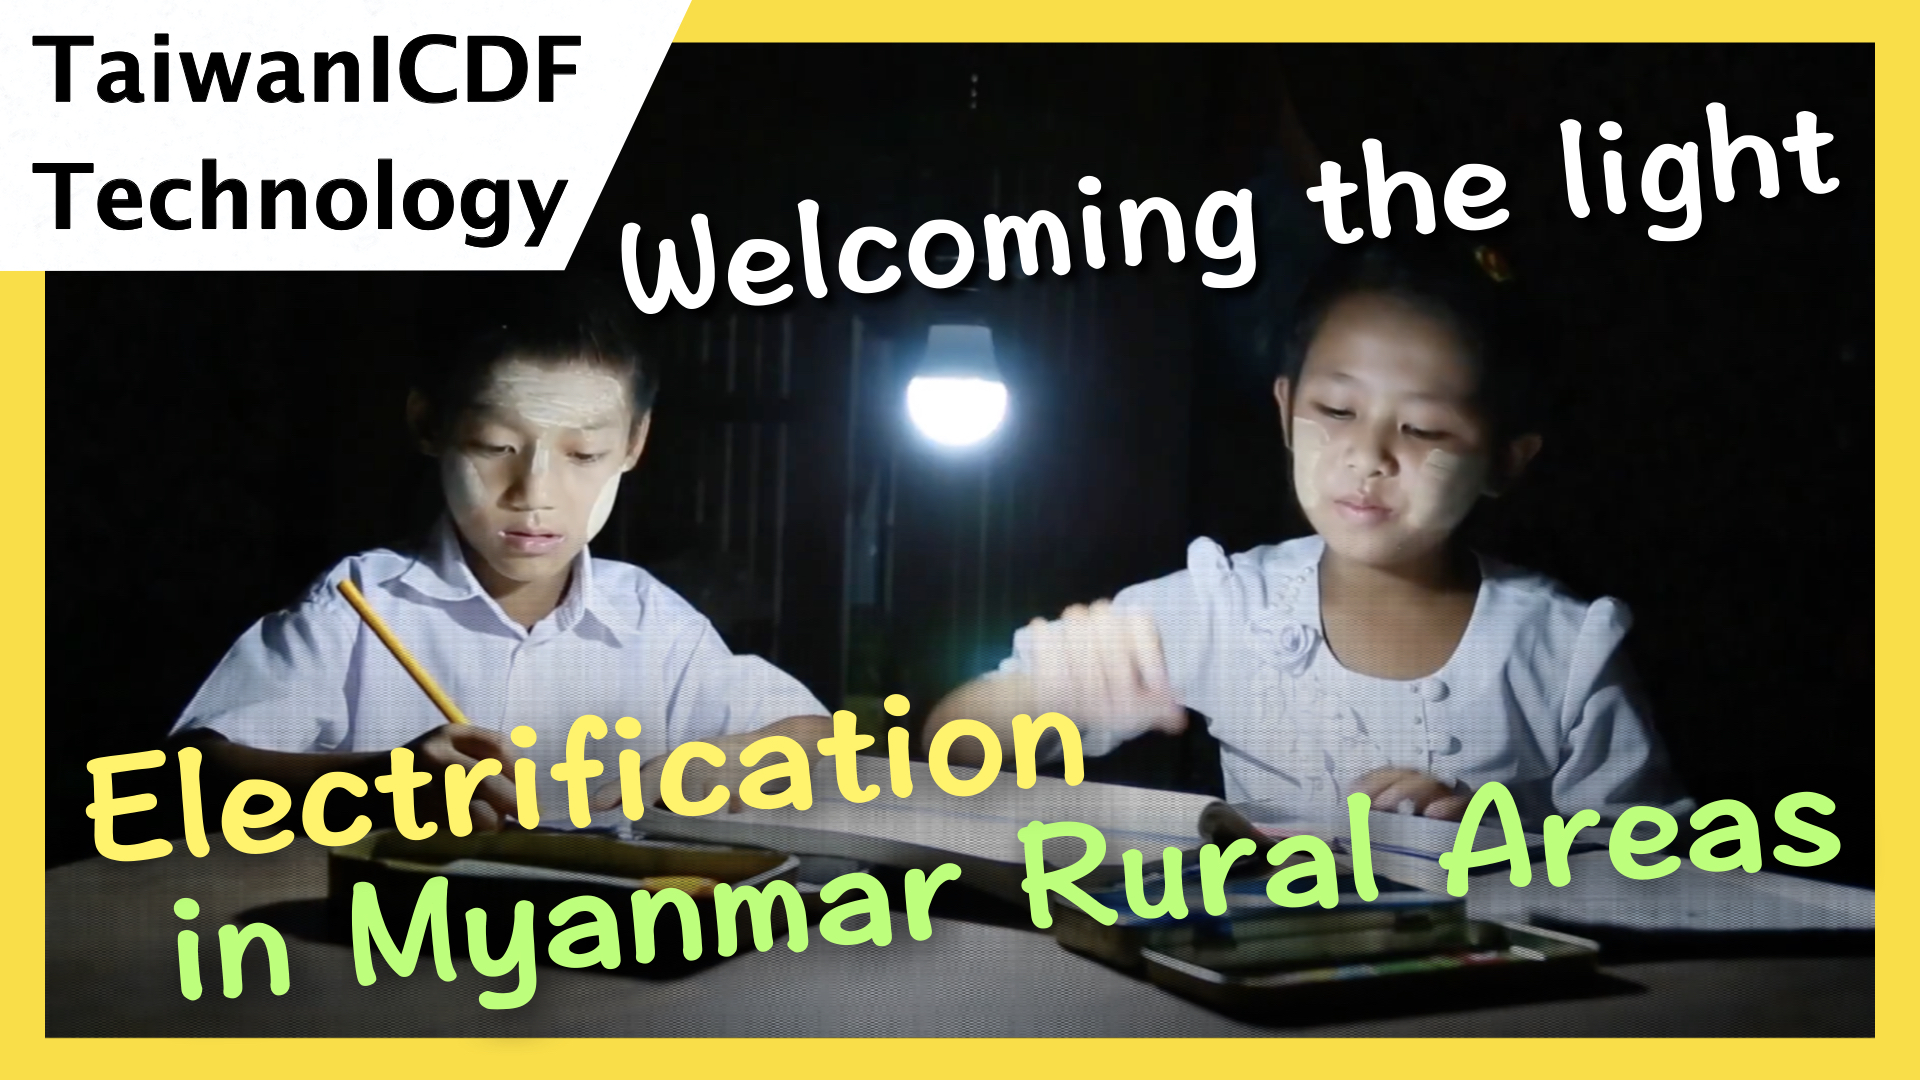 Welcoming the Light --- Solar PV Mini-Grid System for Lighting in Myanmar Rural Areas